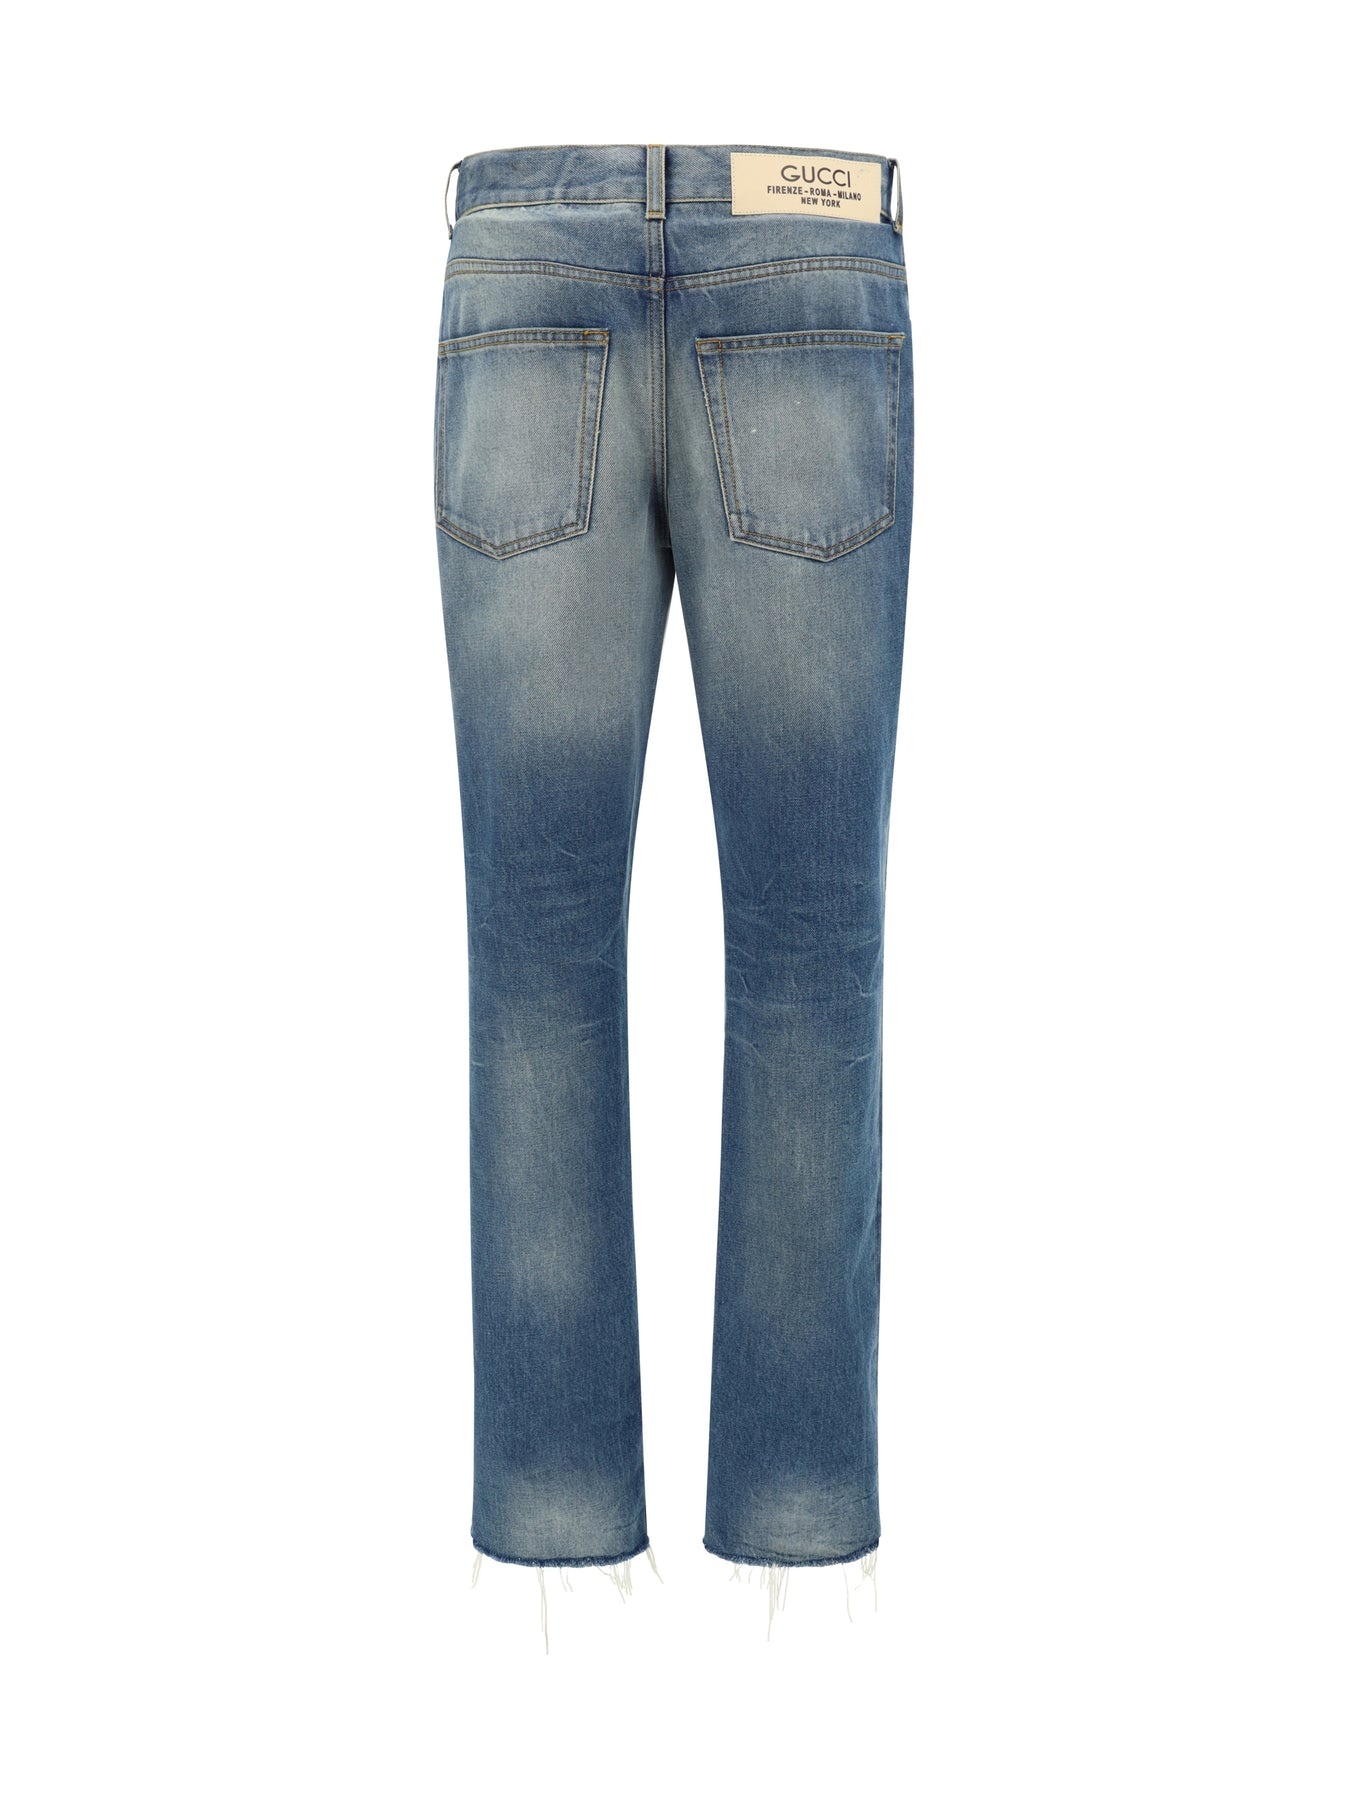 Cotton jeans with logoed label - 2